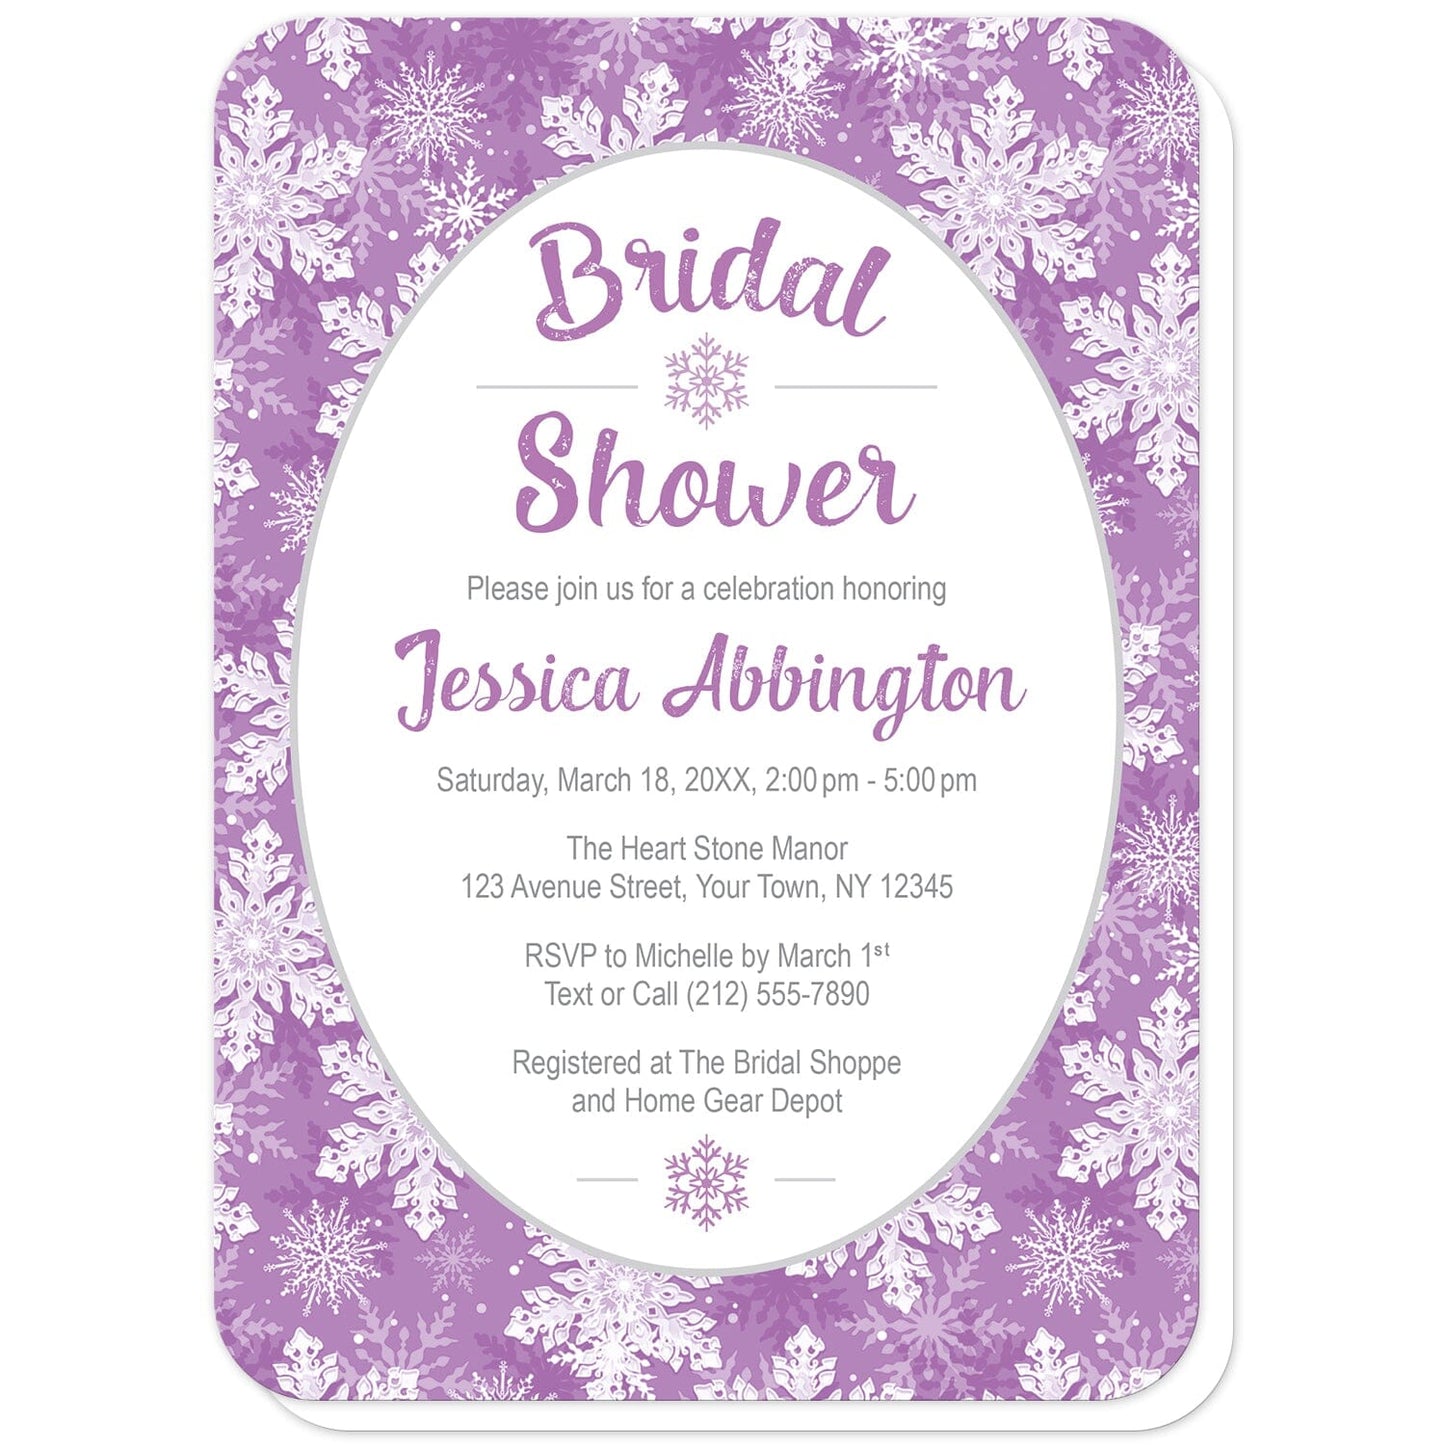 Purple Snowflake Bridal Shower Invitations (with rounded corners) at Artistically Invited. Beautifully ornate purple snowflake bridal shower invitations with your personalized bridal shower celebration details custom printed in purple and gray in a white oval frame design over a purple and white snowflake pattern background.